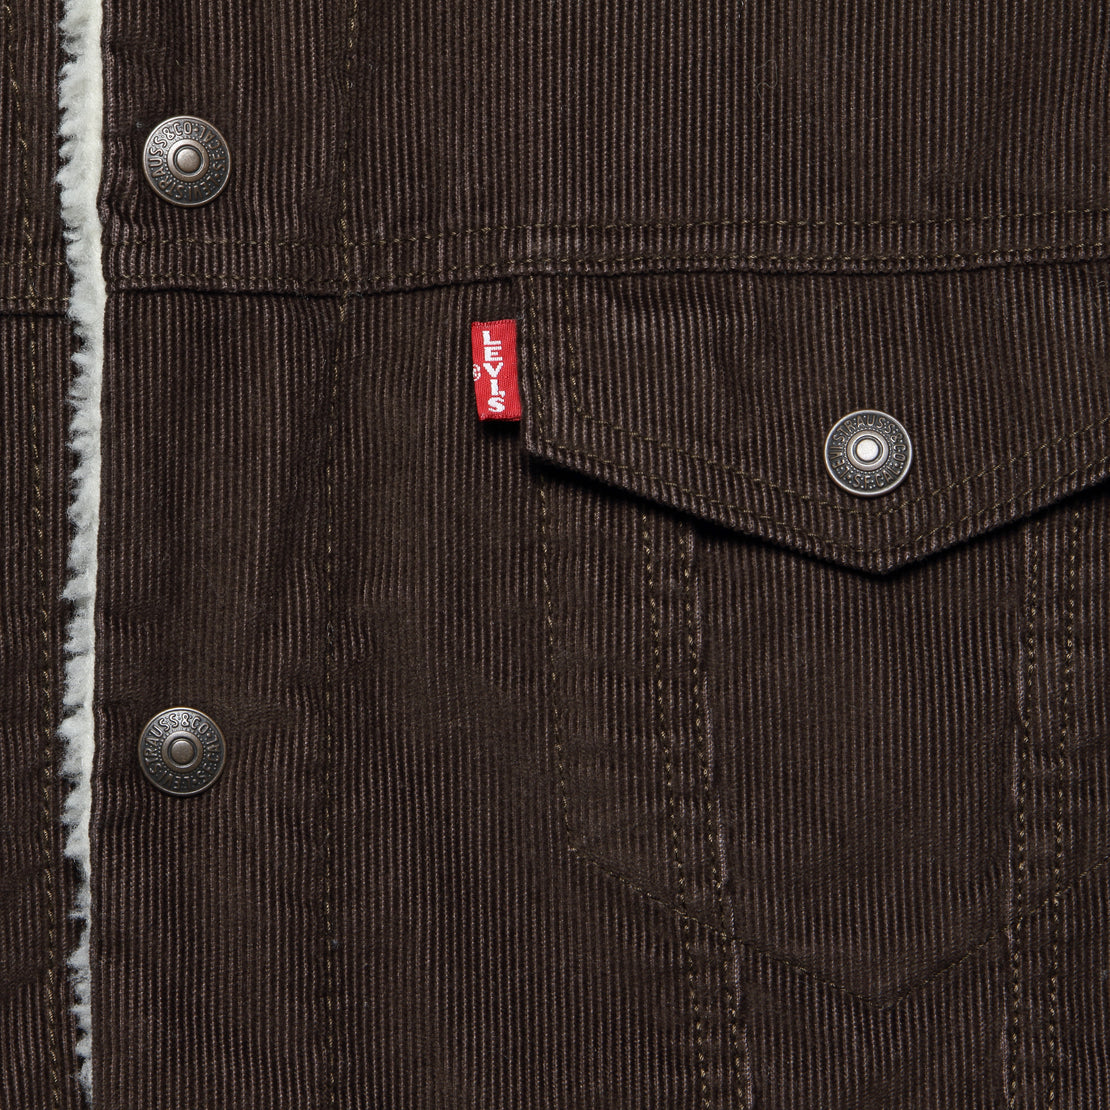 Type III Sherpa Trucker Jacket - Java Cord Sherpa - Levis Premium - STAG Provisions - Outerwear - Coat / Jacket